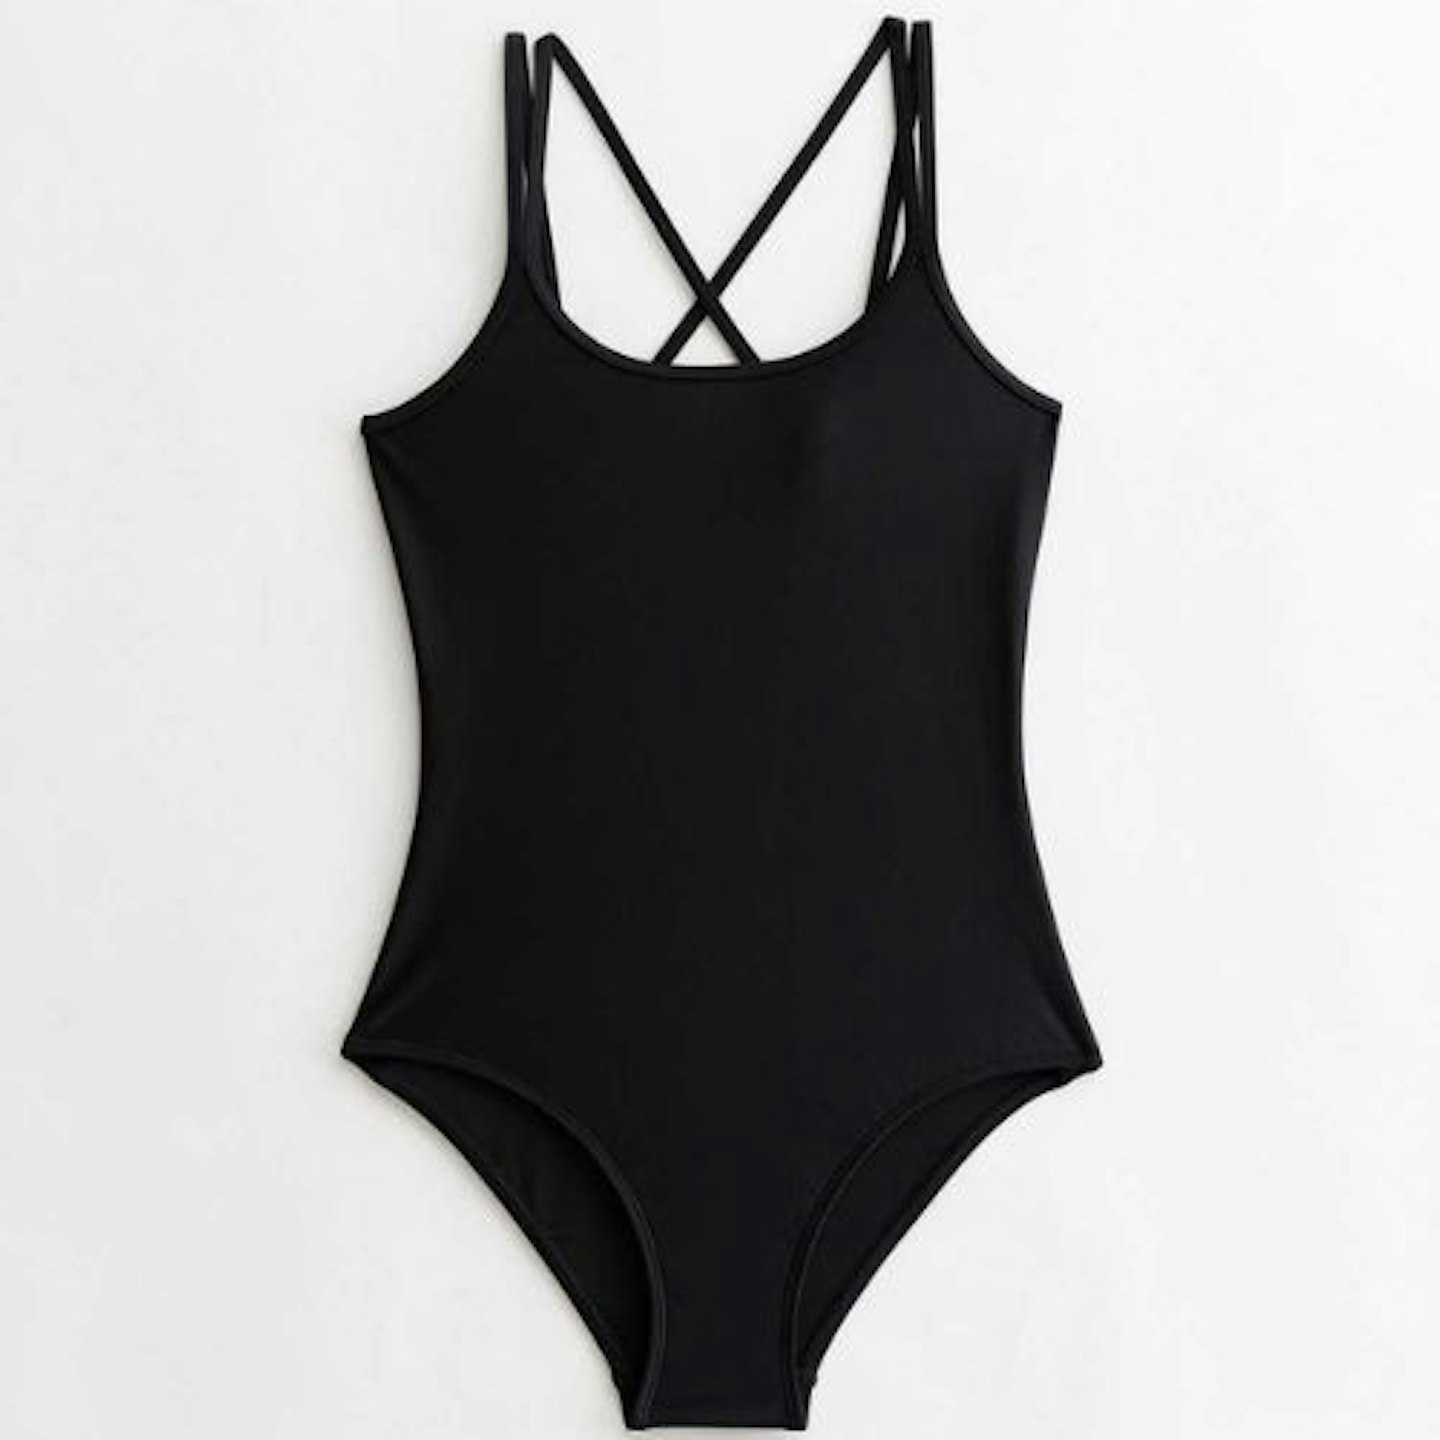 Matching Family Swimsuits:  Girls Black Strappy Back Swimsuit